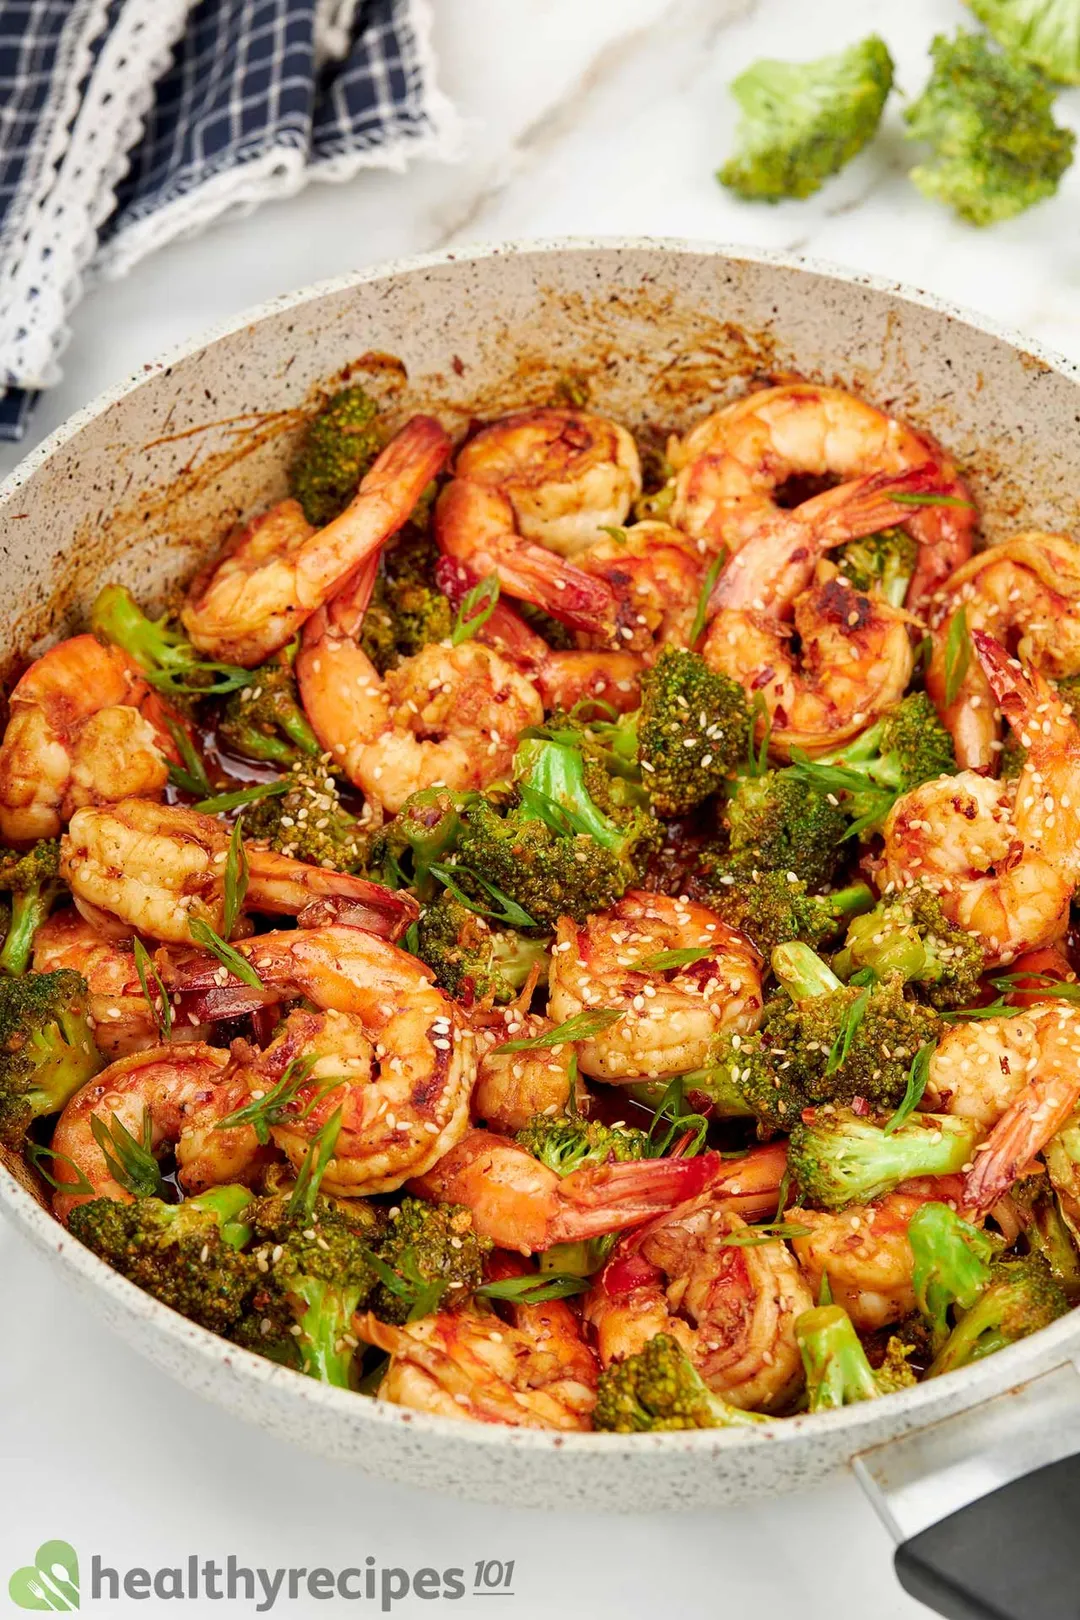 What Go Well With Sauteed Shrimp Recipes